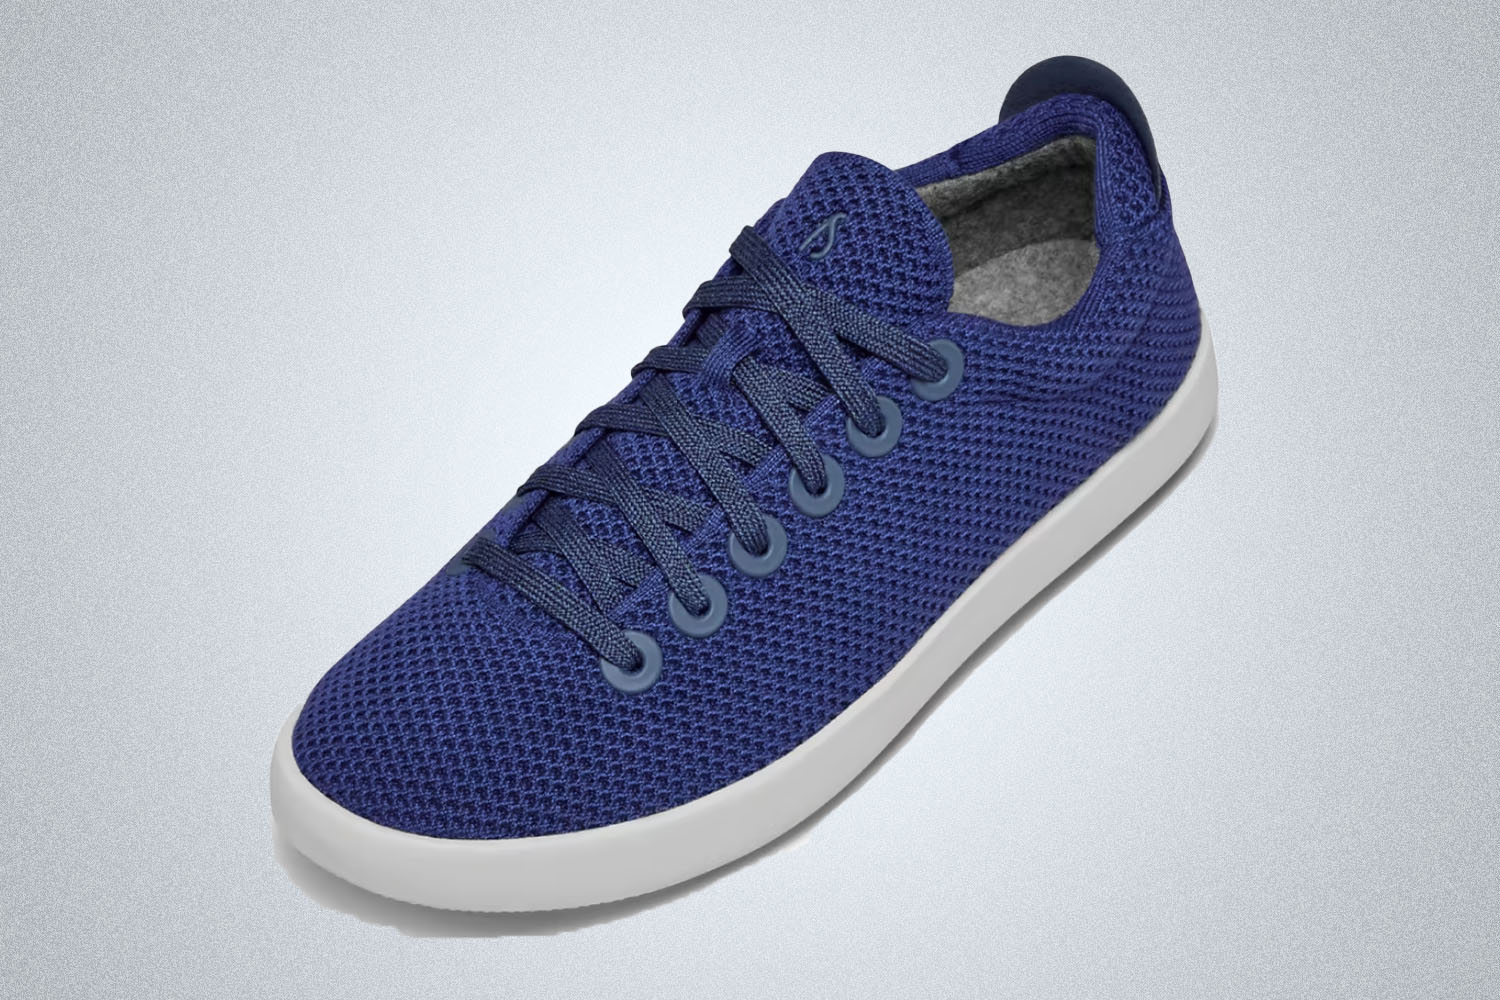 The blue Tree Piper sneaker from Allbirds on a grey background